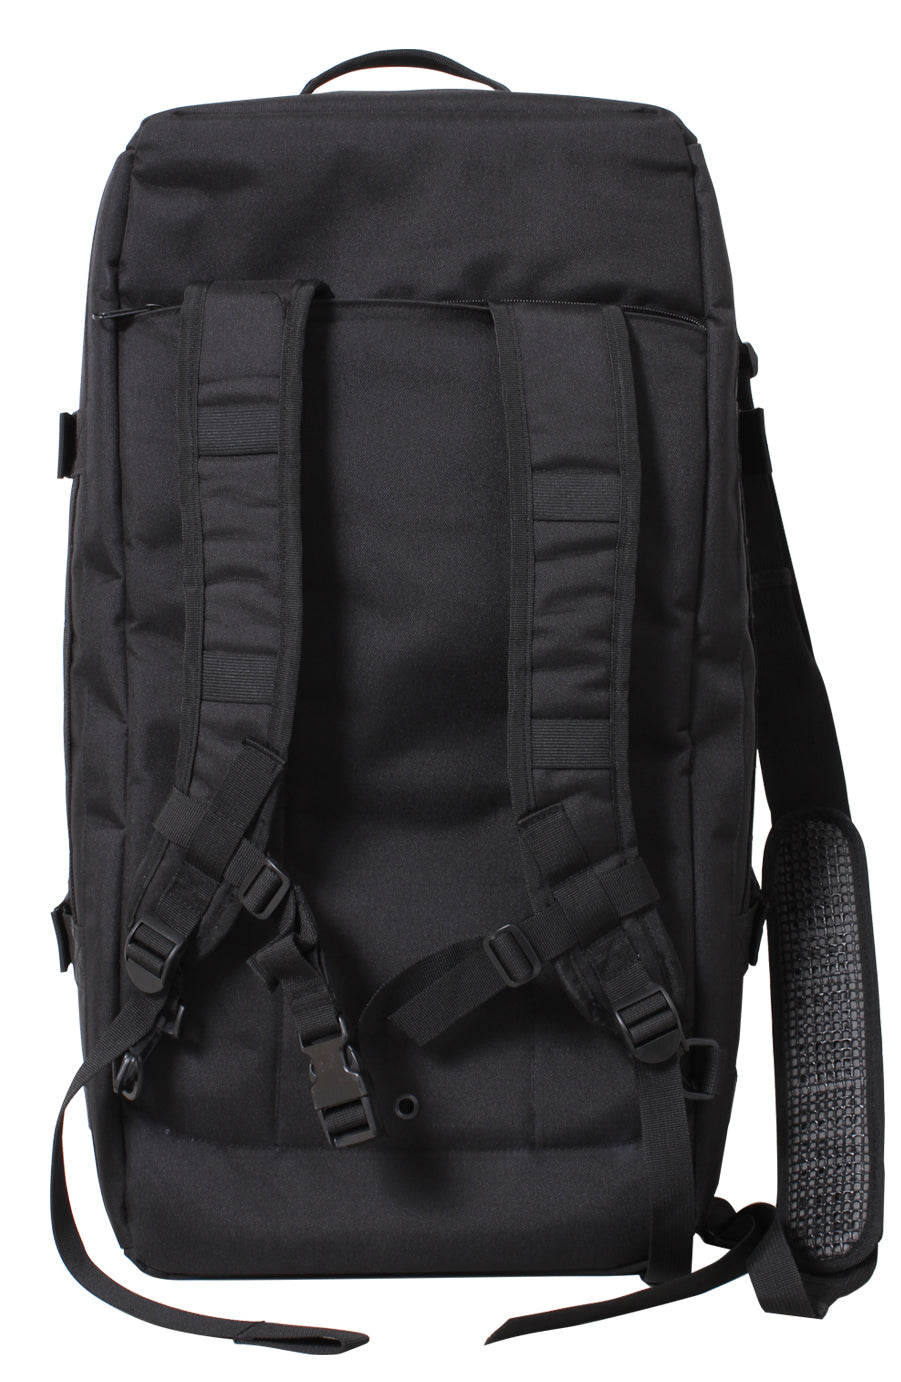 3-In-1 Convertible Mission Bag by Rothco